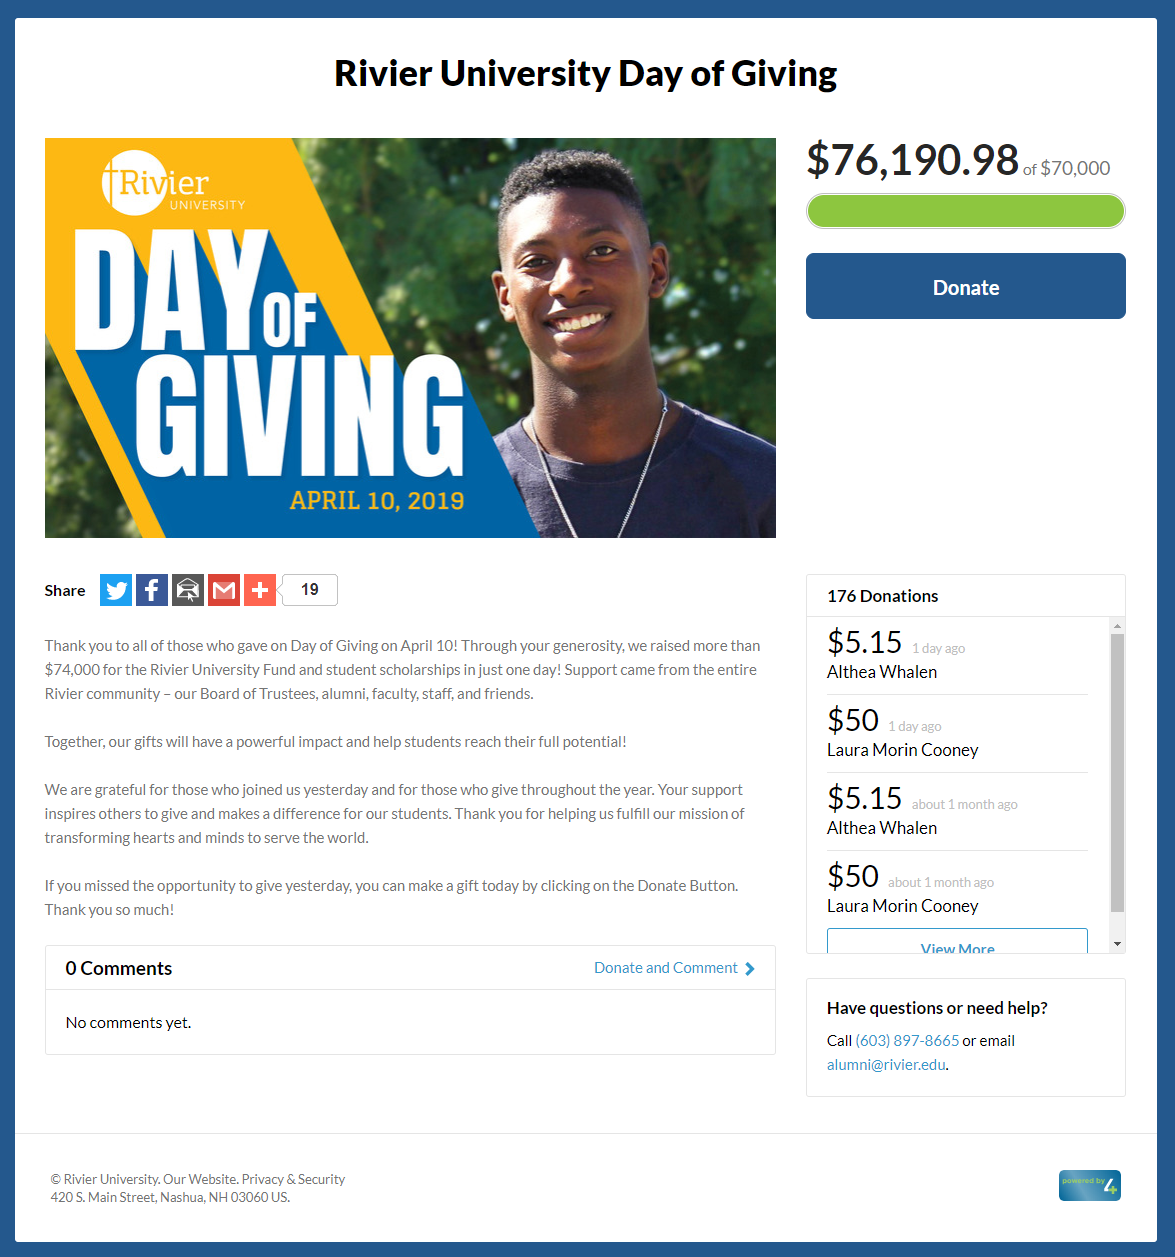 Rivier University Day of Giving crowdfunding page